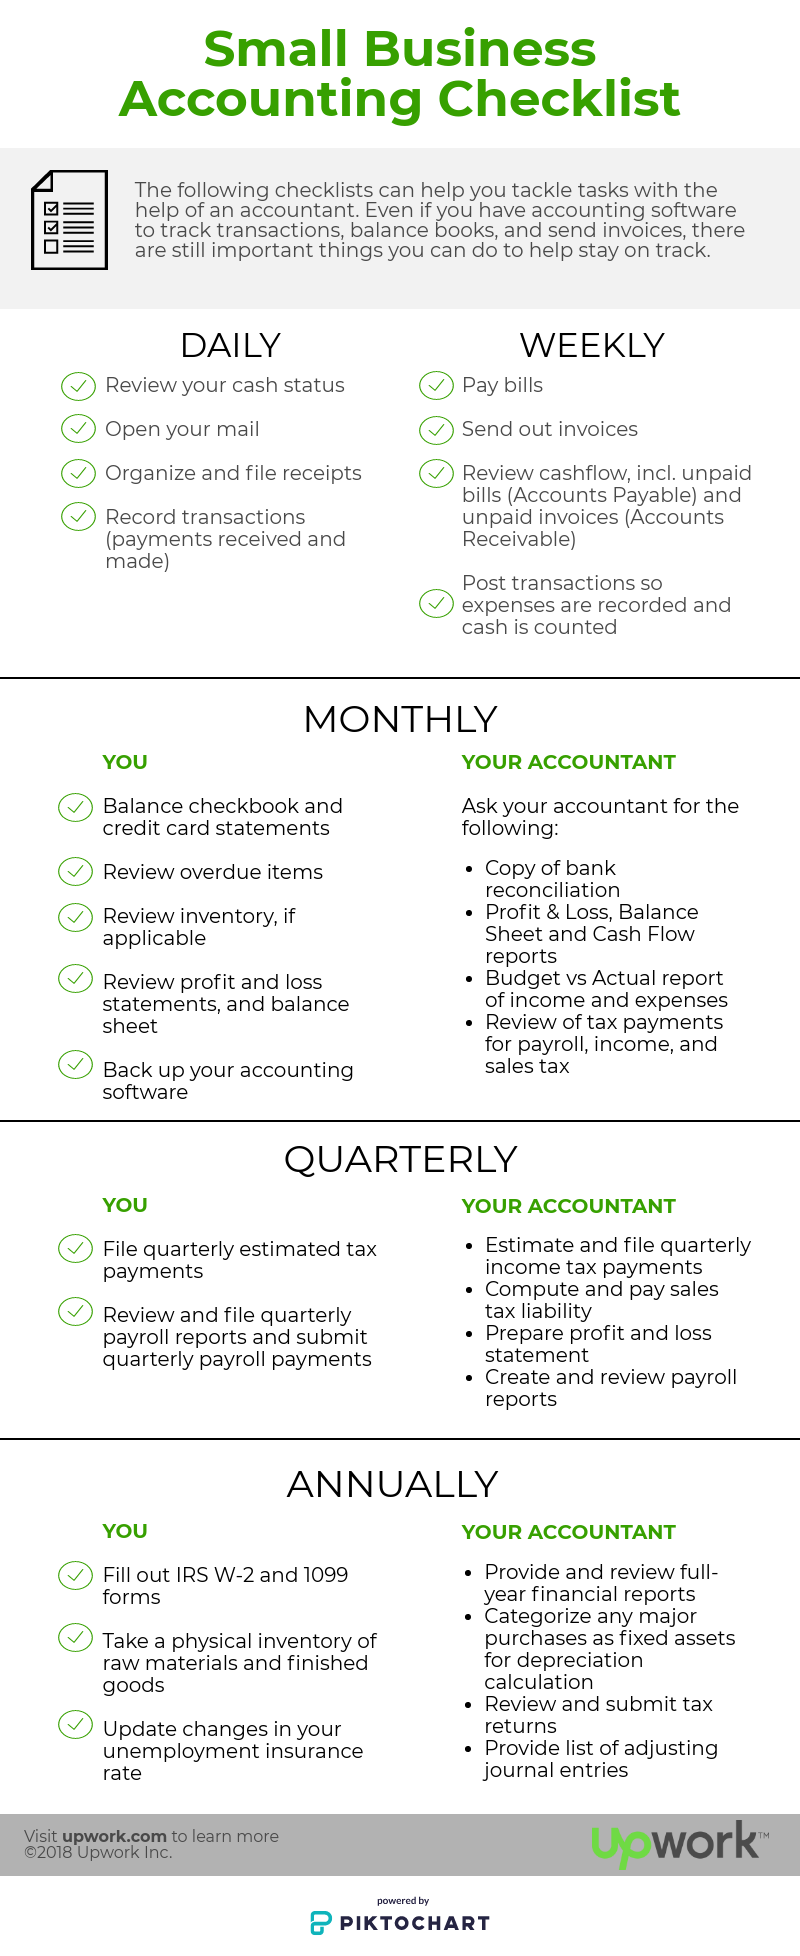 The Small Business Accounting Checklist [Infographic]